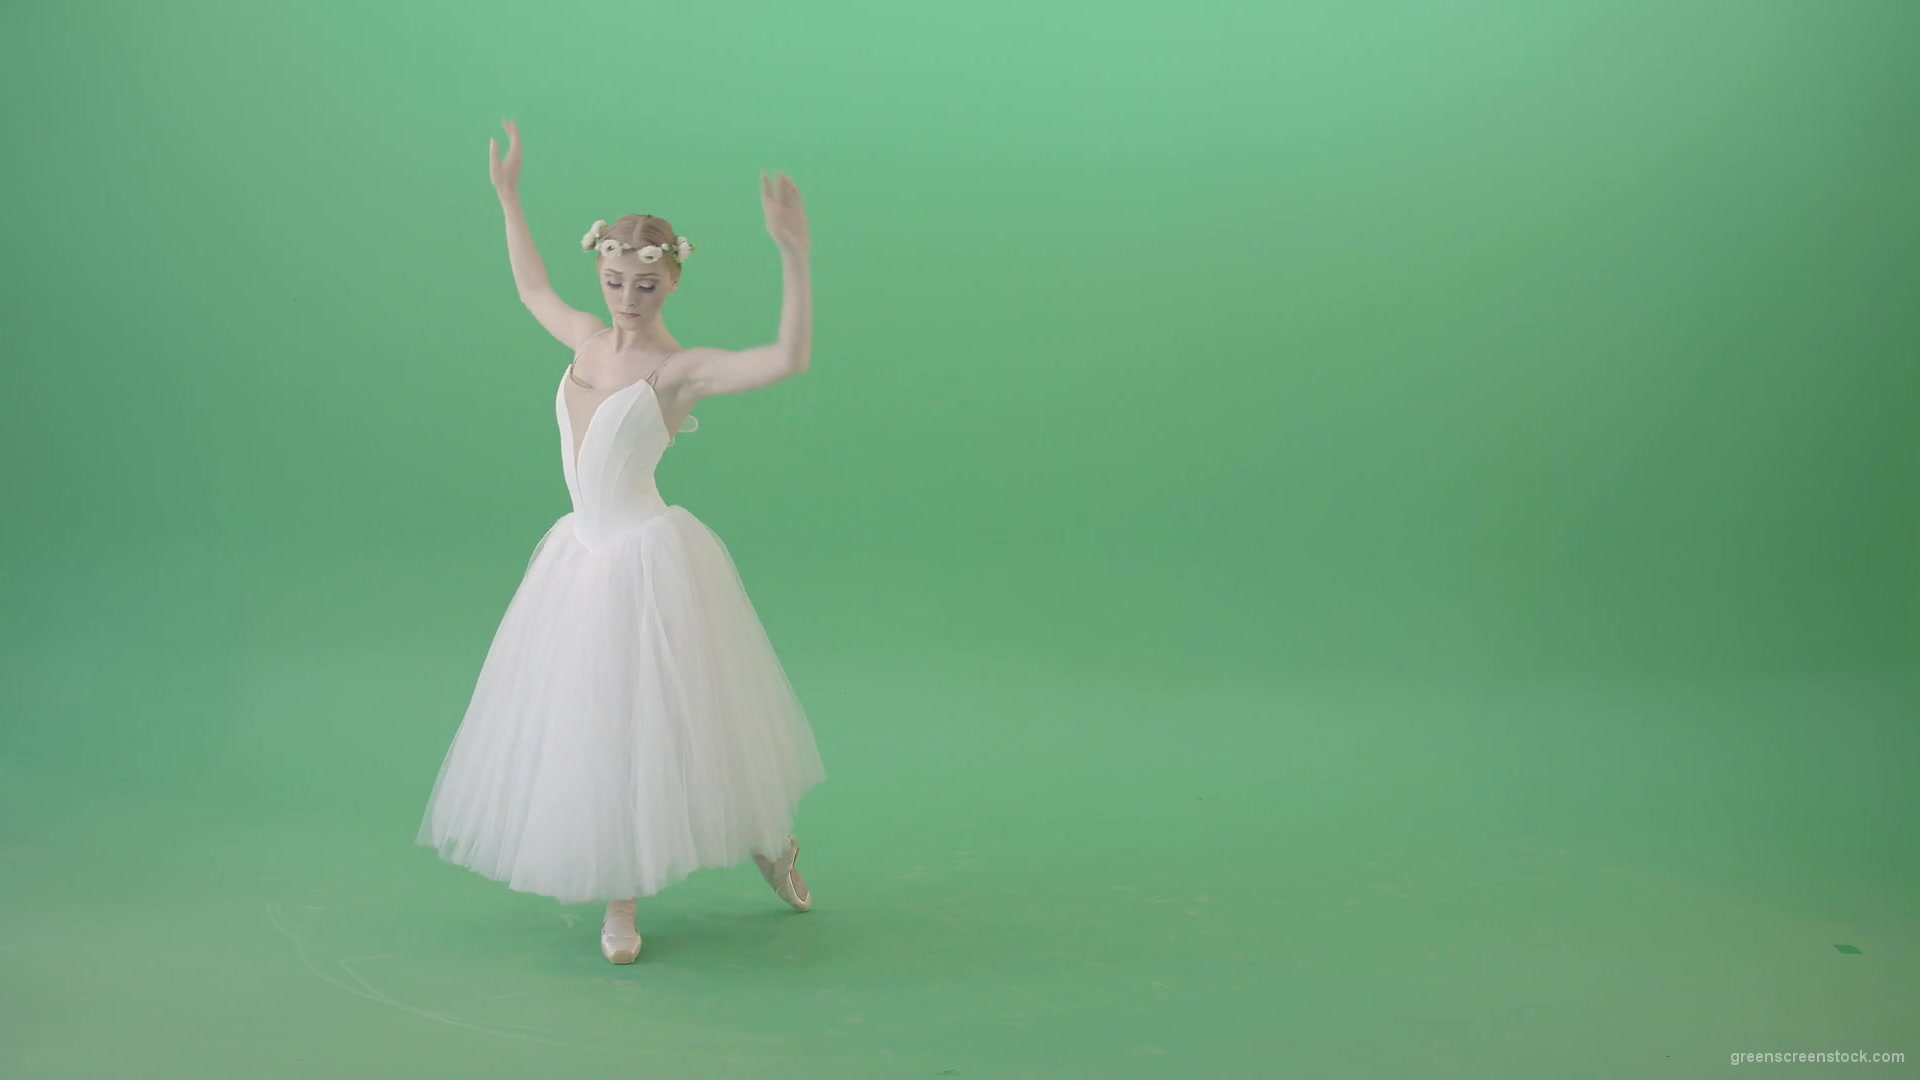 Blonde-Girl-in-elegant-white-wedding-dress-mowing-away-and-dancing-ballet-art-isolated-on-green-screen-4K-Video-Footage-1920_009 Green Screen Stock